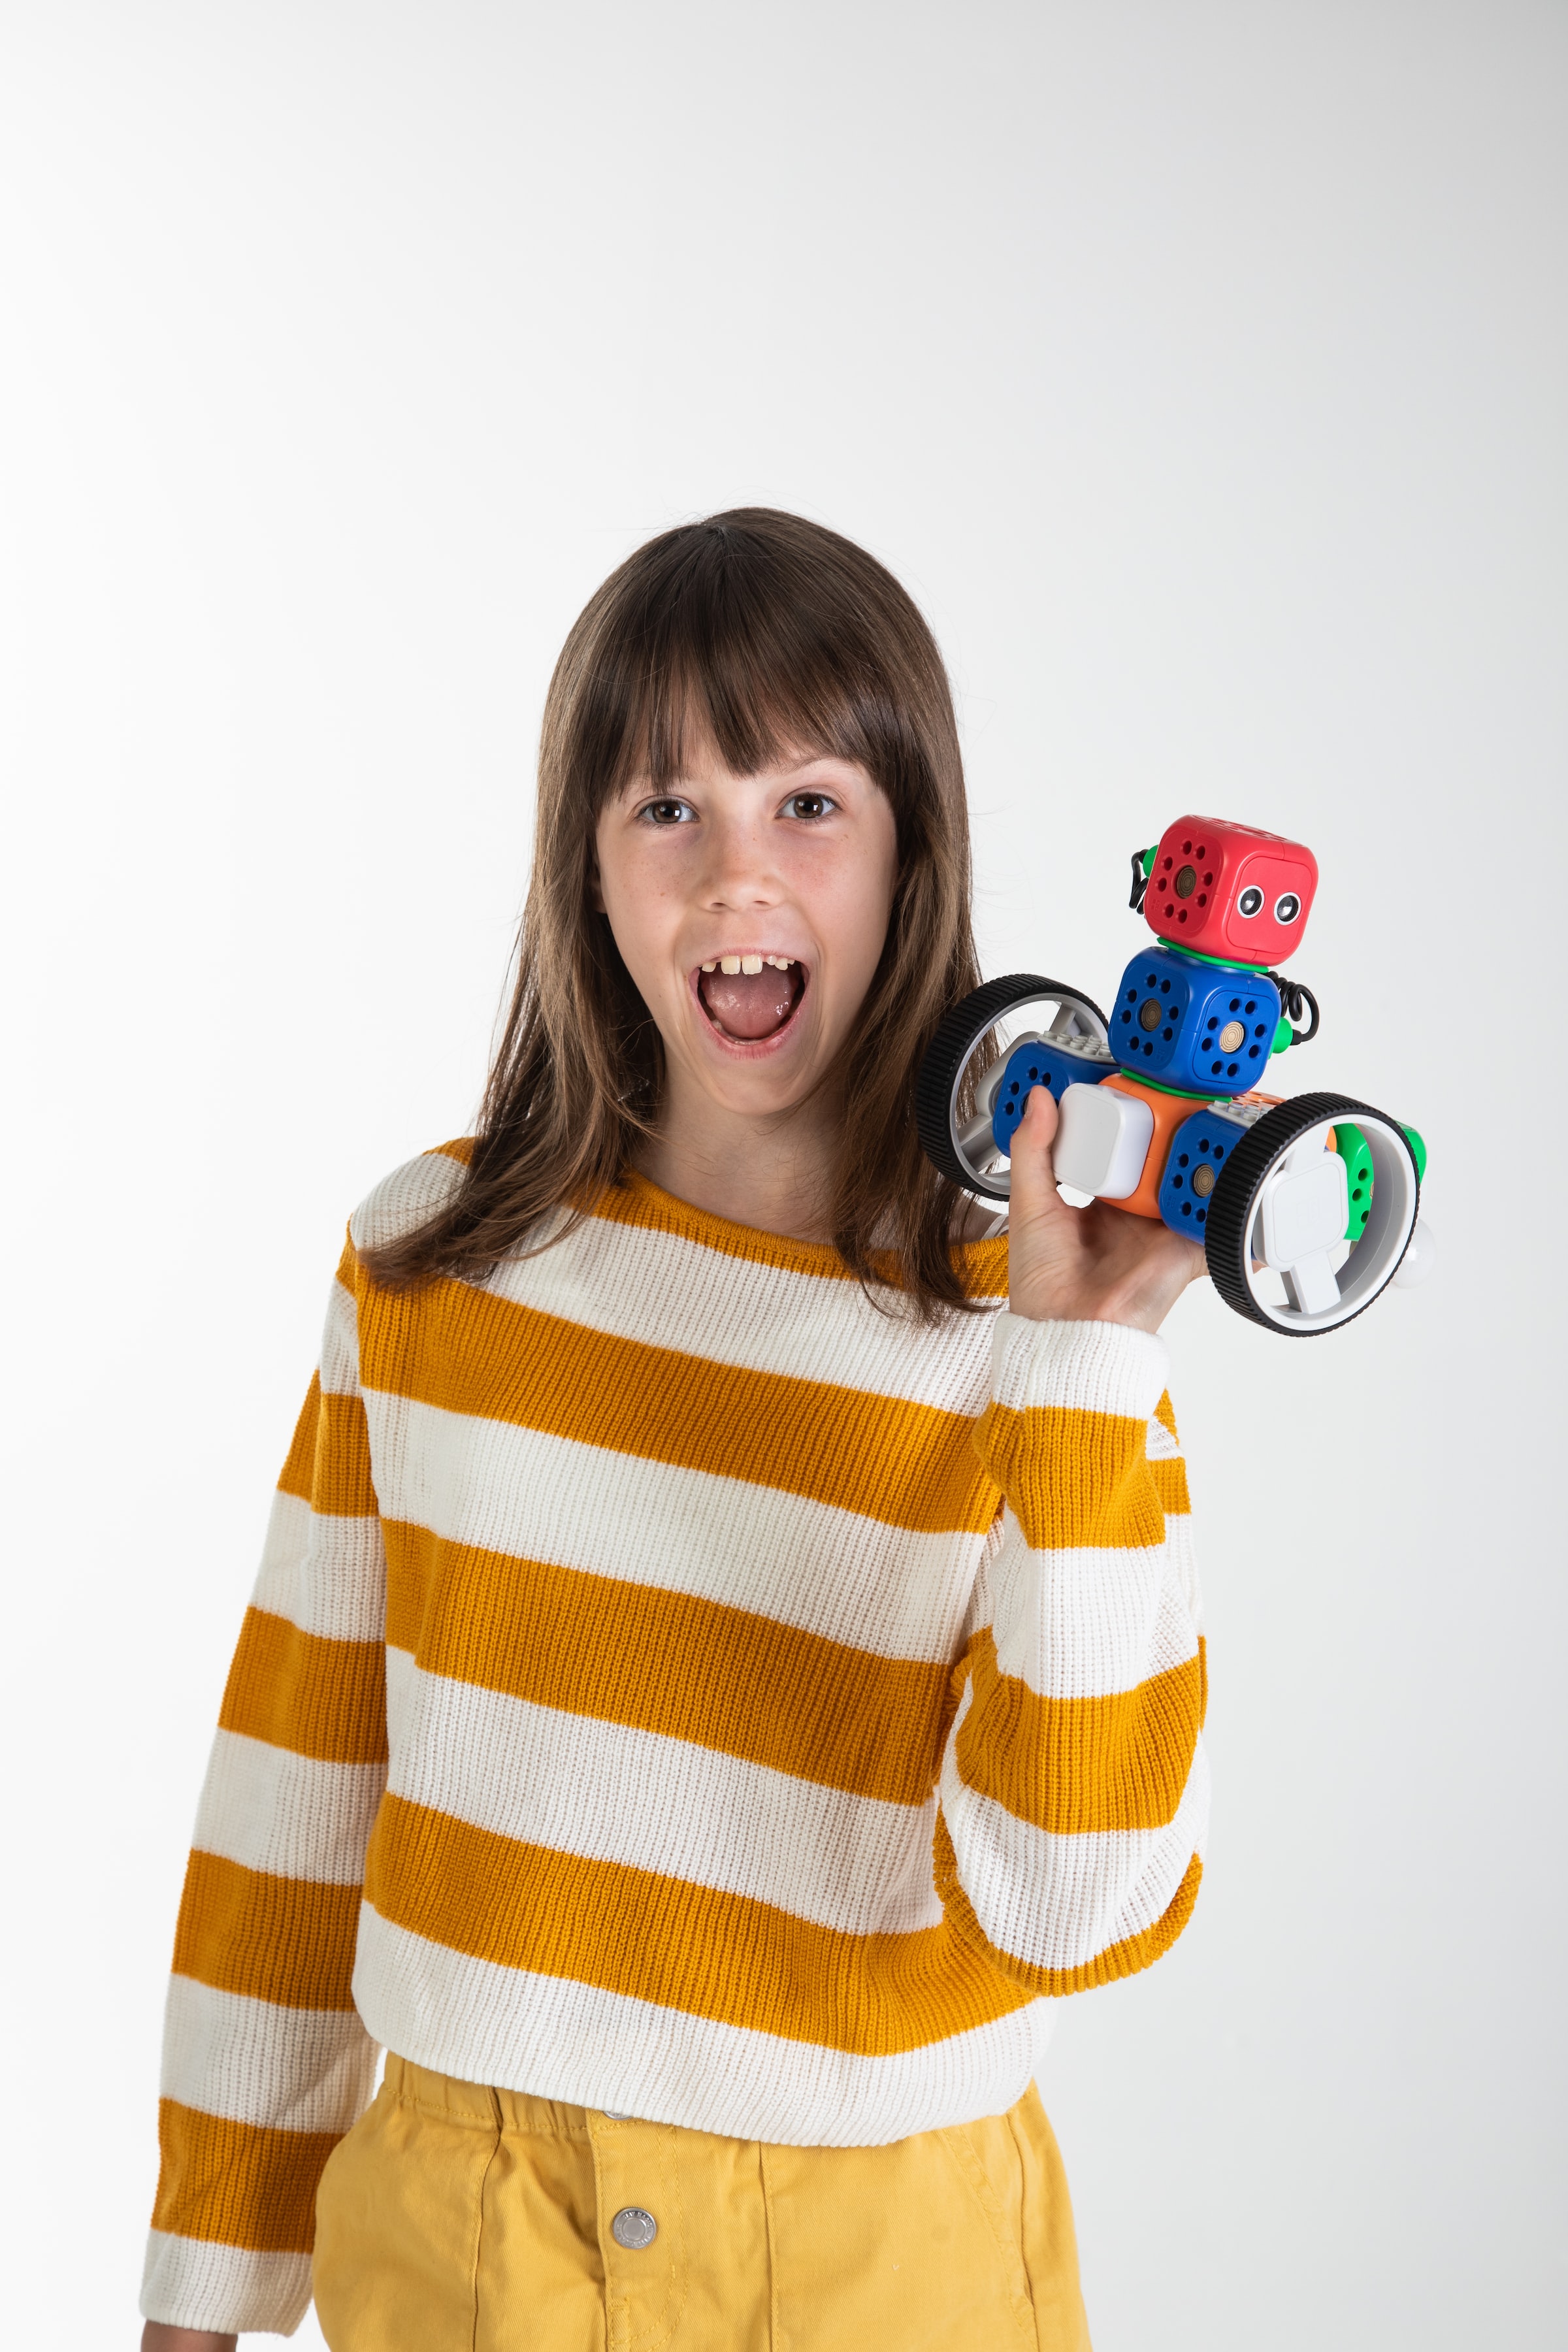 a smiling child holding a small robot in one hand